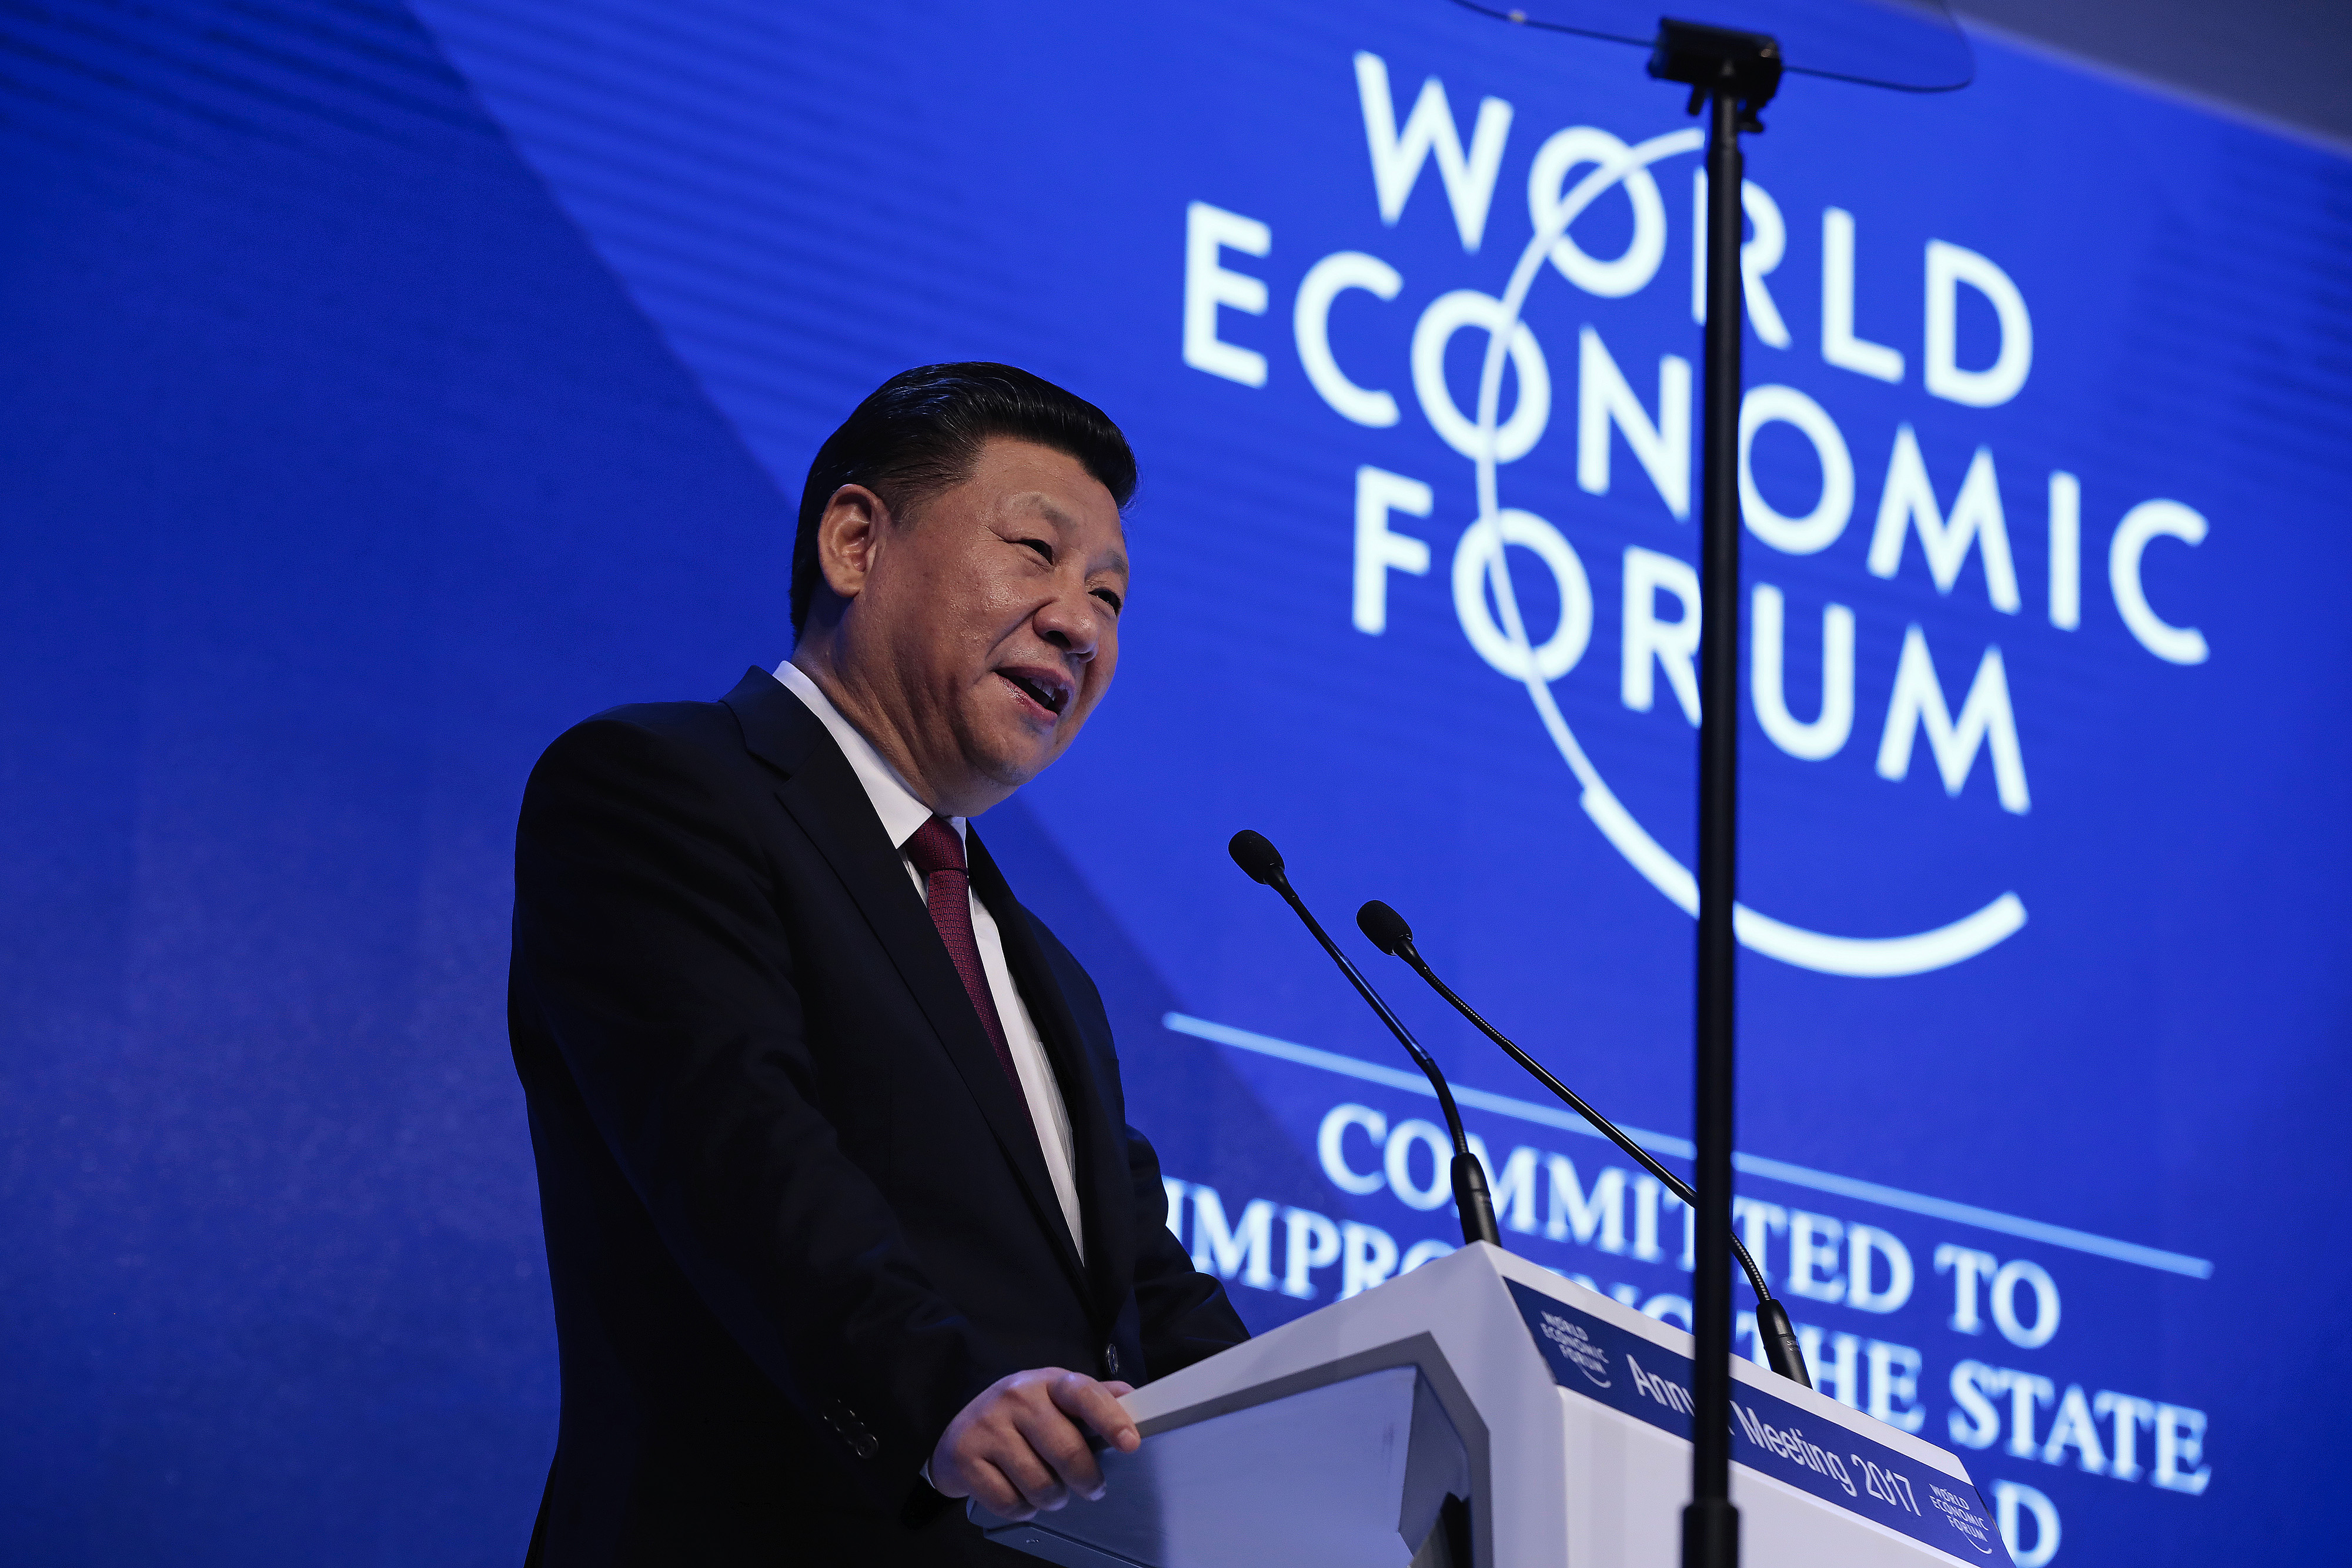 Xi Jinping, China's President, speaks during the opening plenary session of the World Economic Forum annual meeting in Davos, Switzerland, on Tuesday, Jan. 17, 2017 (Jason Alden/Bloomberg/Getty Images)